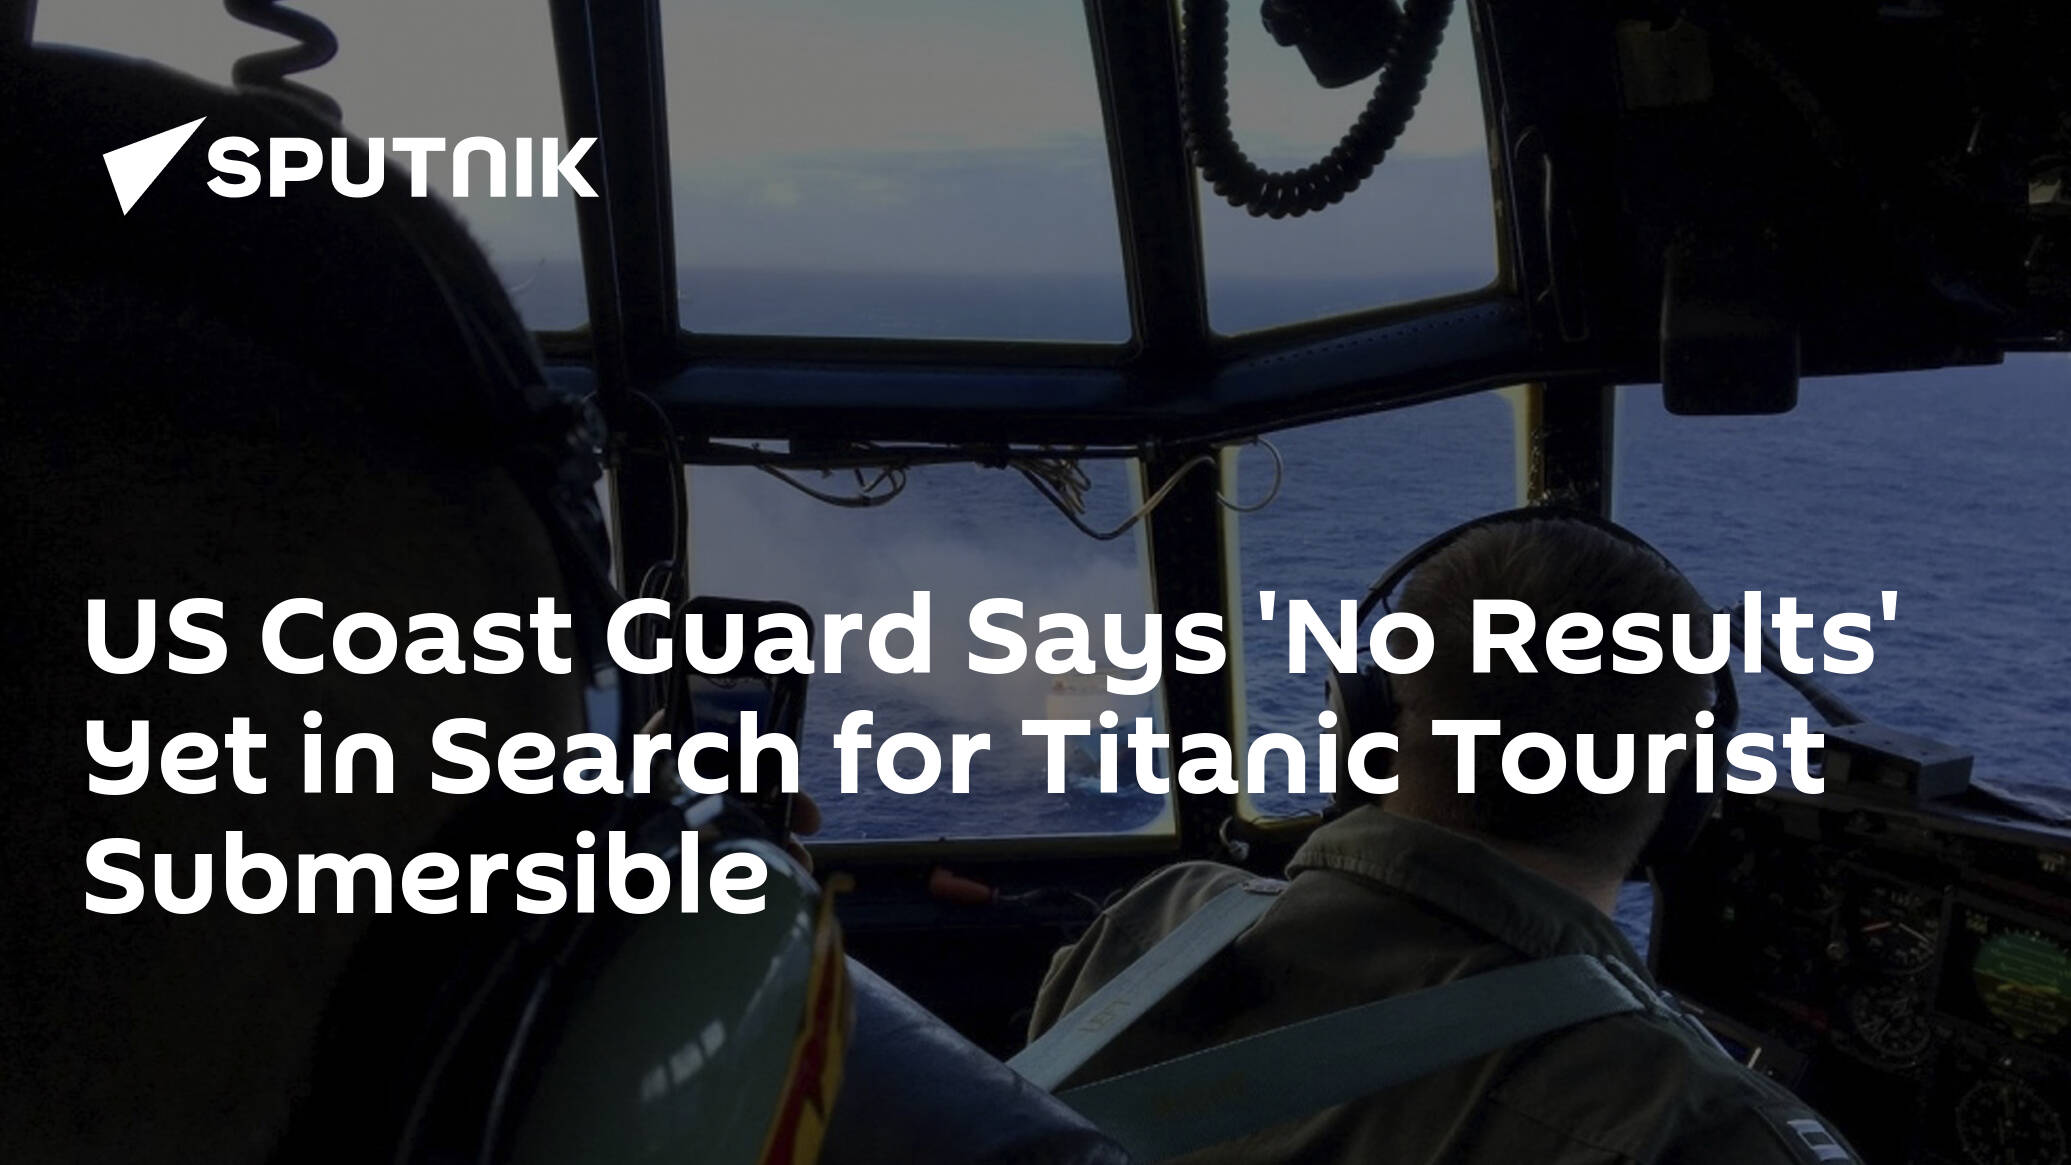 US Coast Guard Says 'No Results' Yet in Search for Titanic Tourist Submersible